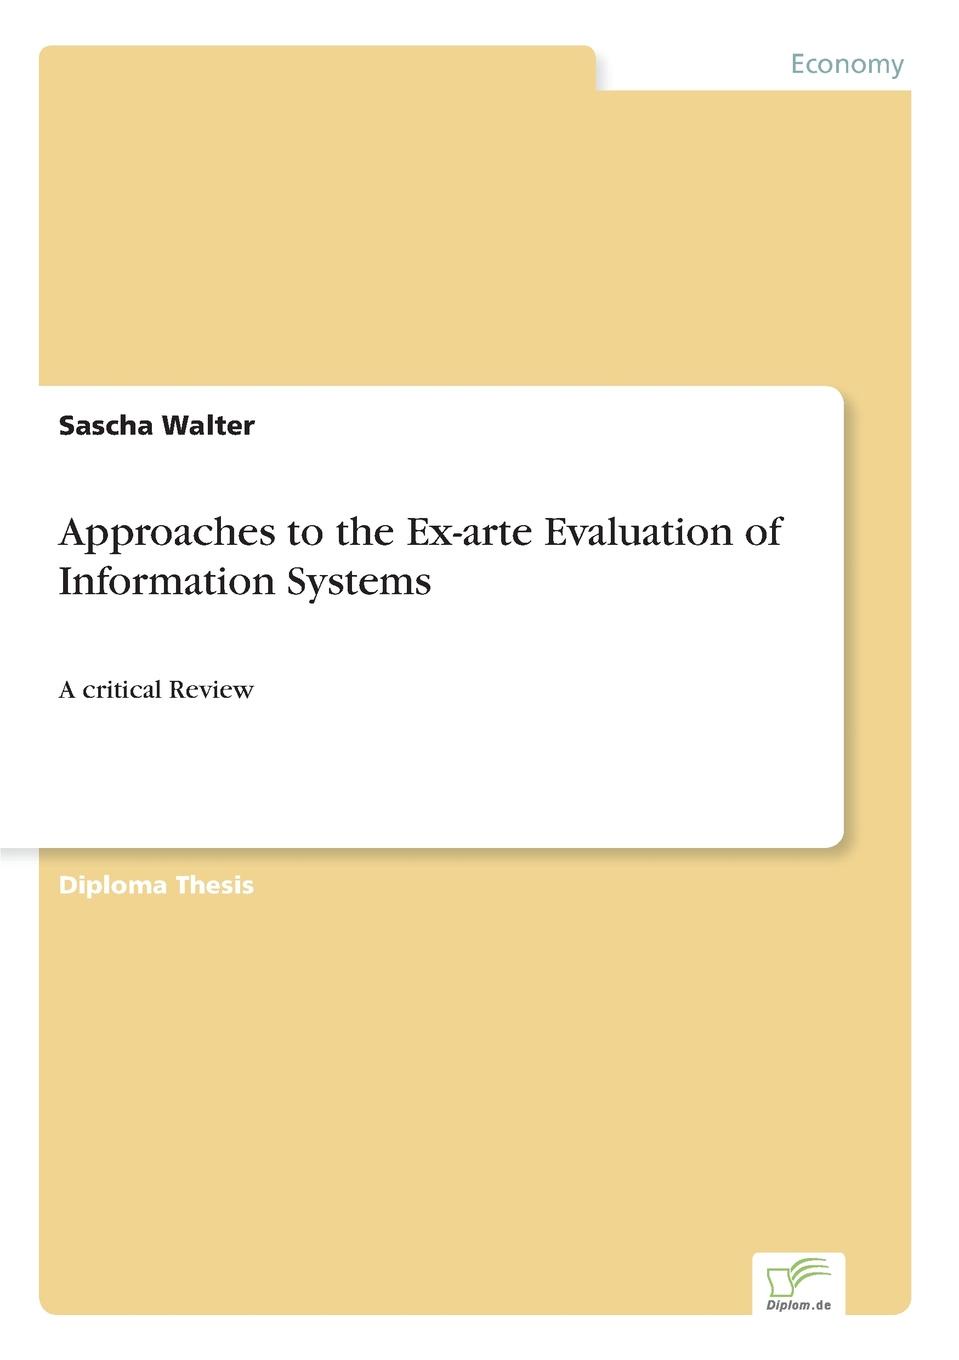 Approaches to the Ex-arte Evaluation of Information Systems